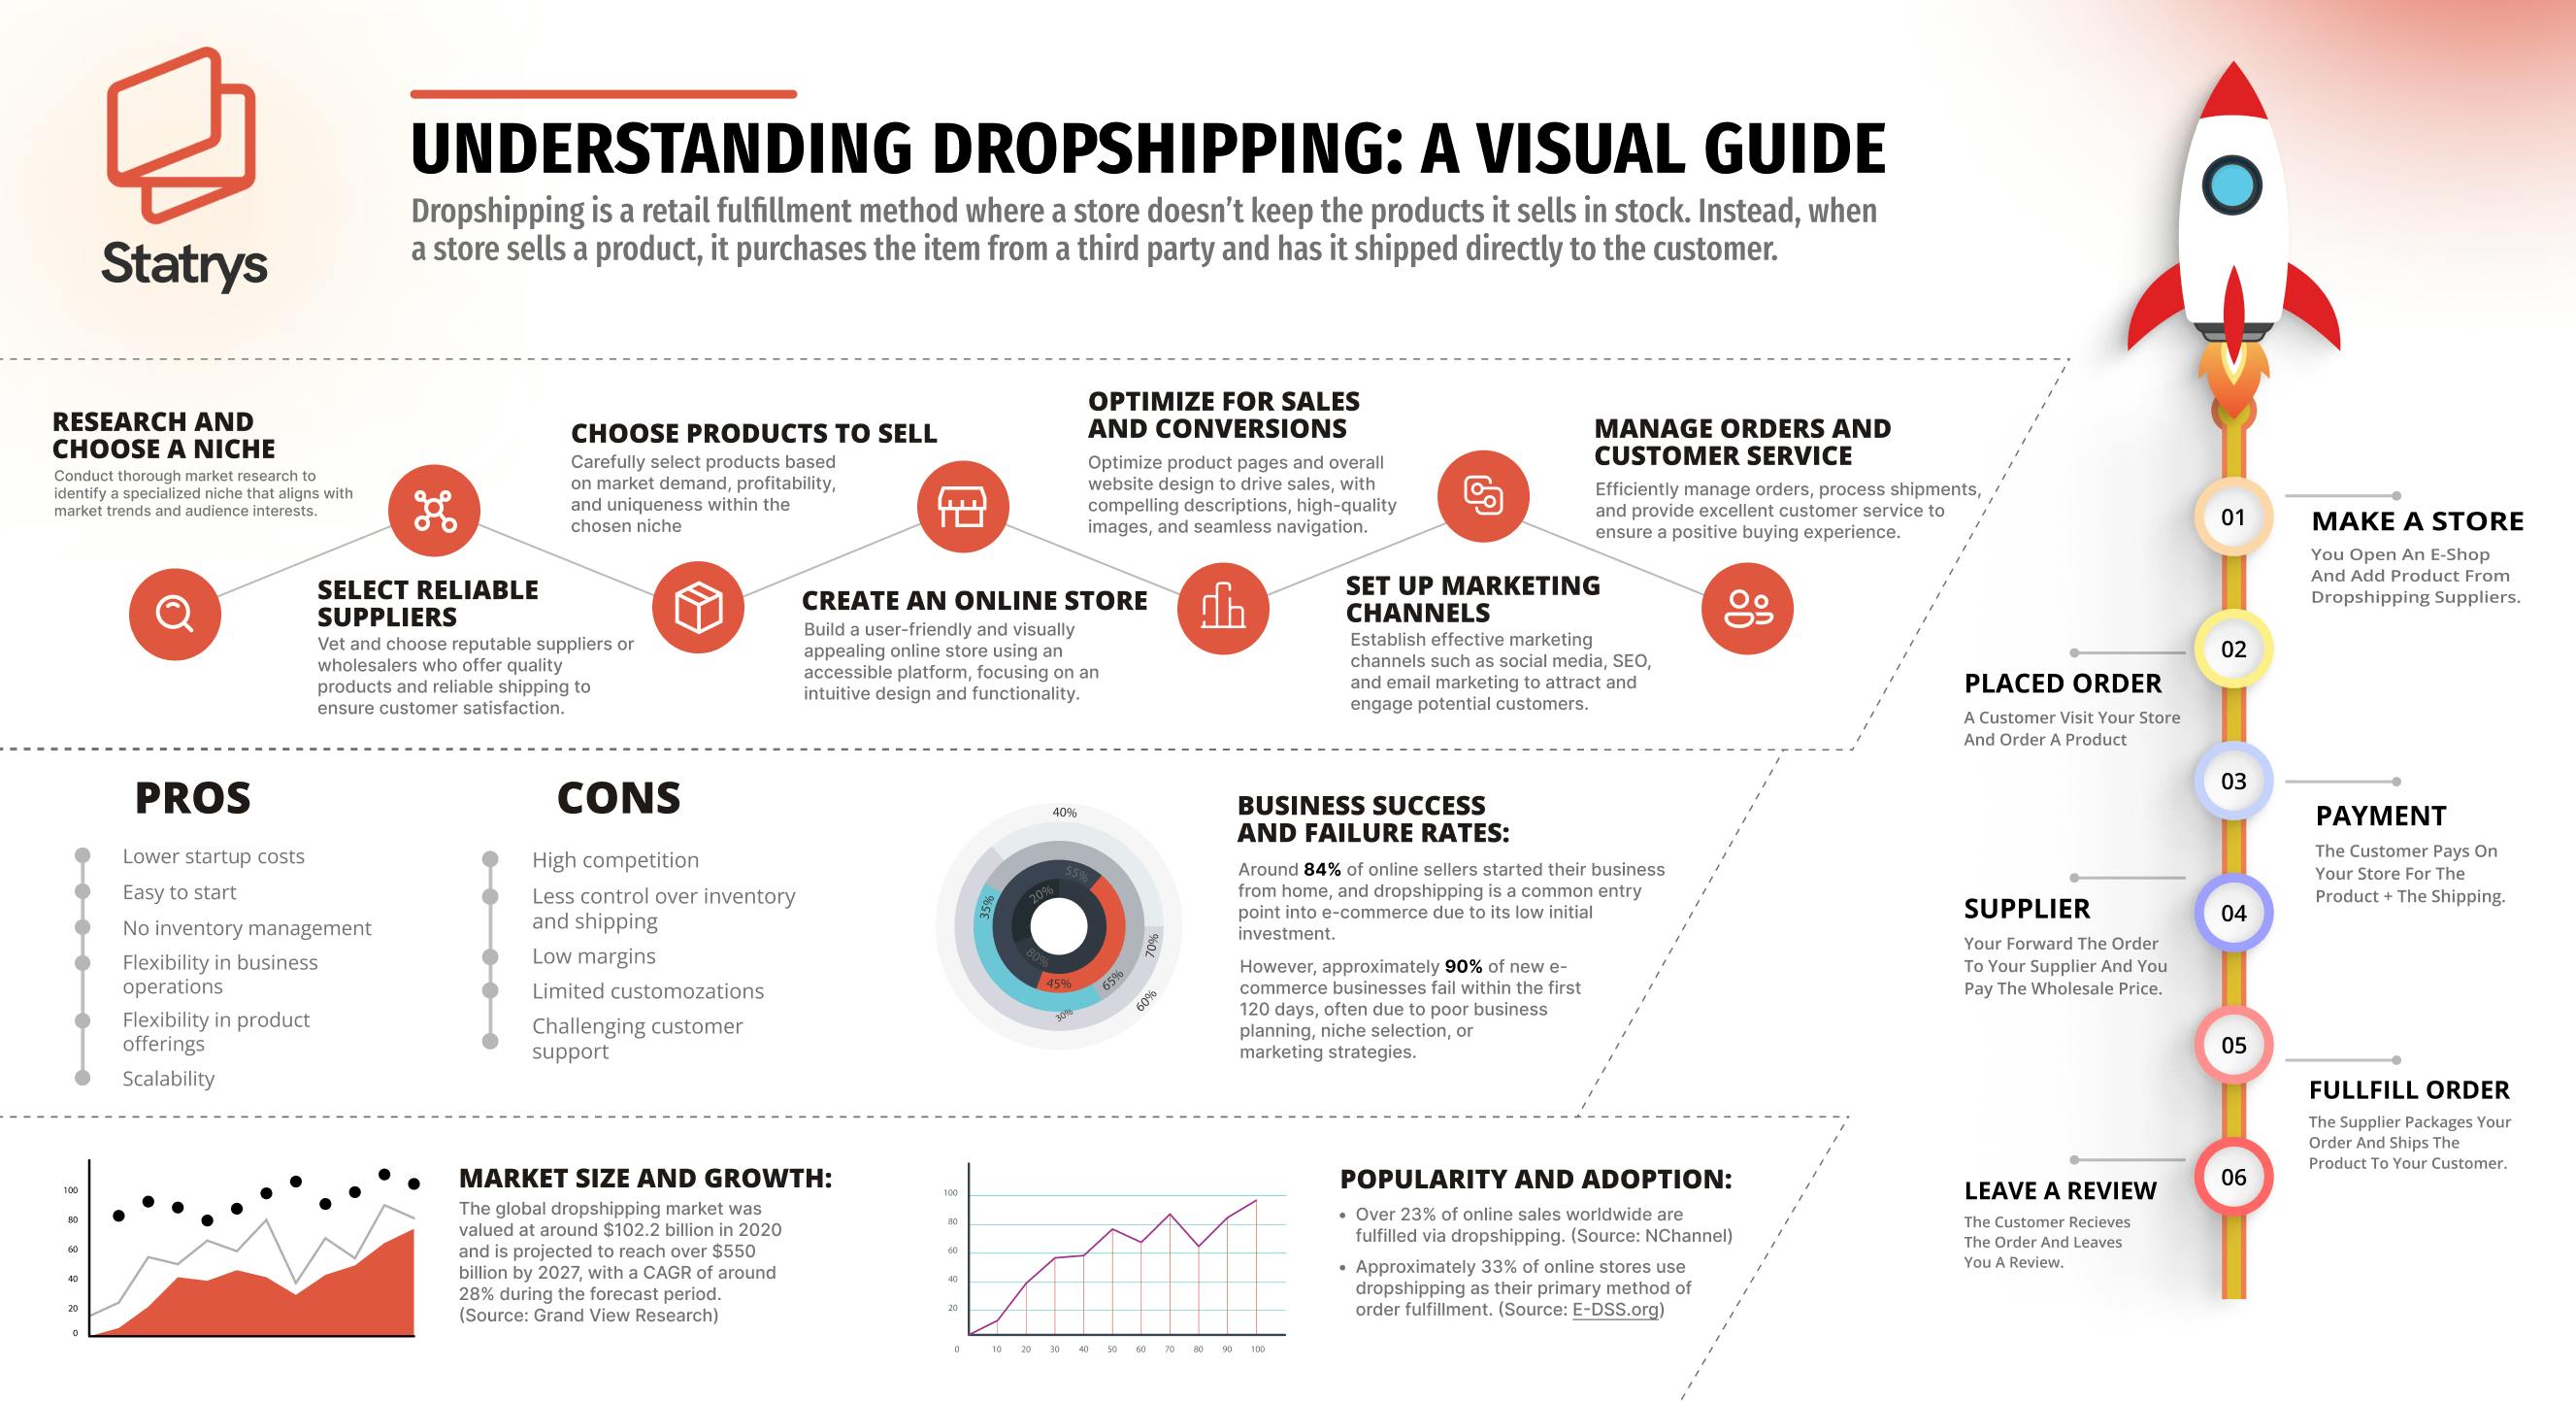 An infographic showing how dropshipping works.